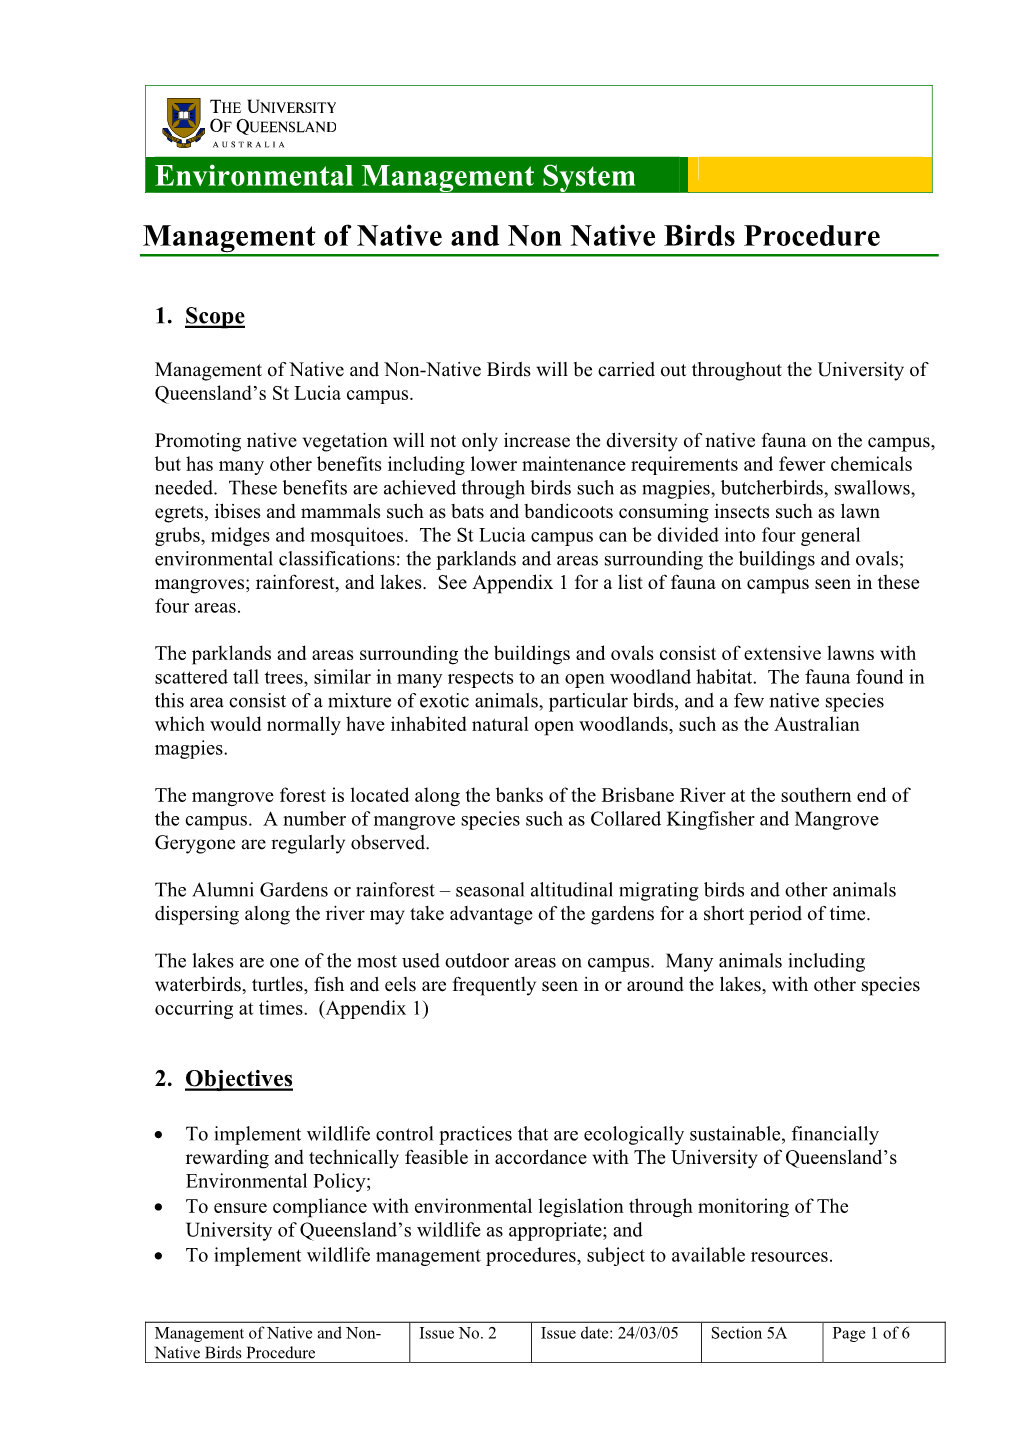 Management of Native and Non-Native Birds Procedure